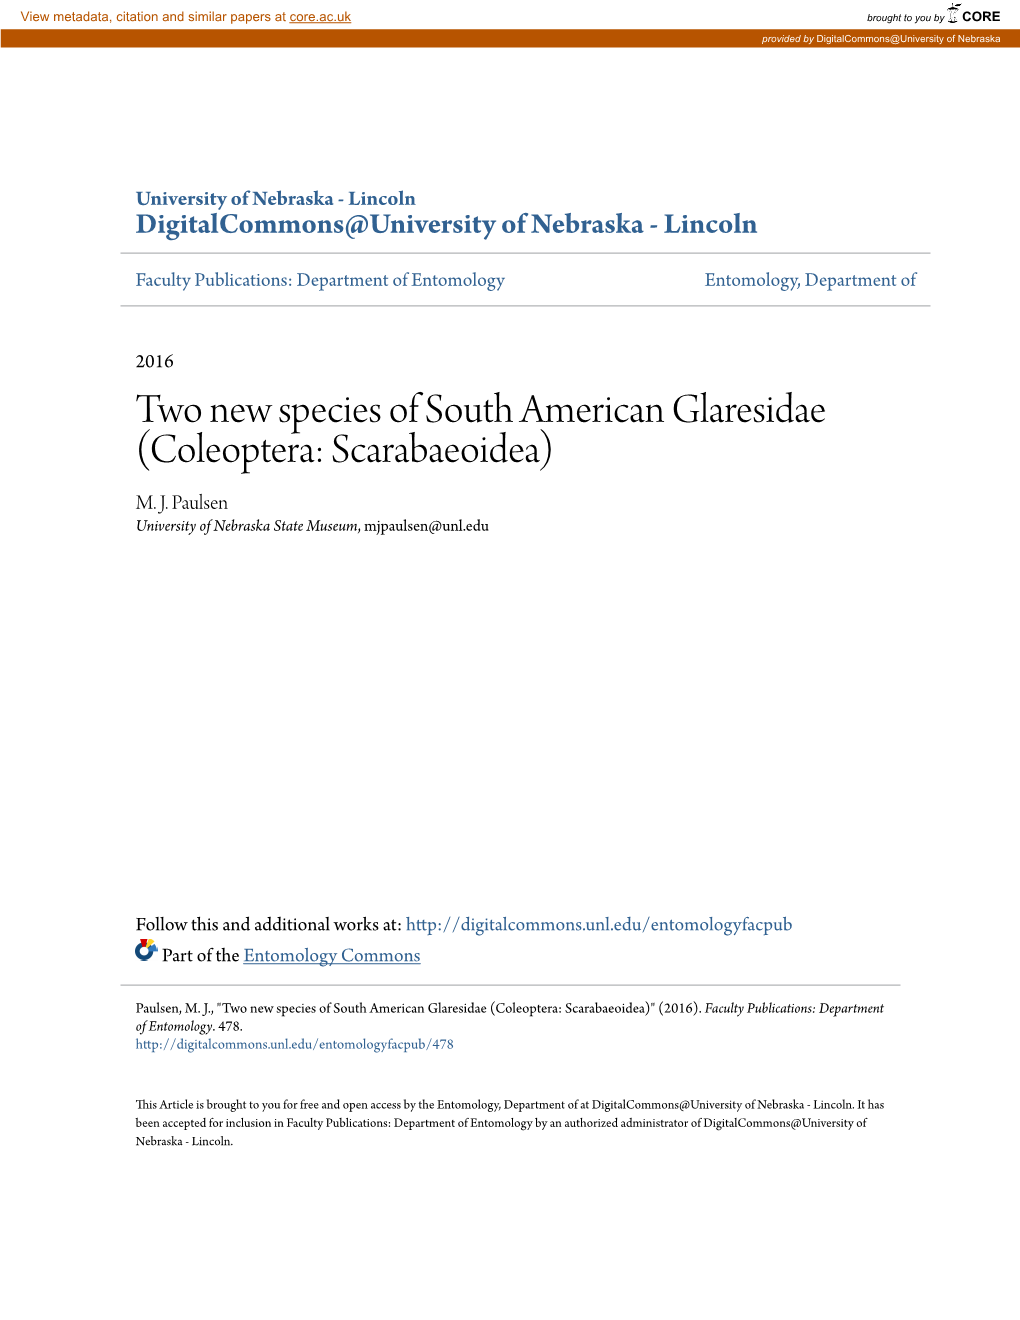 Two New Species of South American Glaresidae (Coleoptera: Scarabaeoidea) M